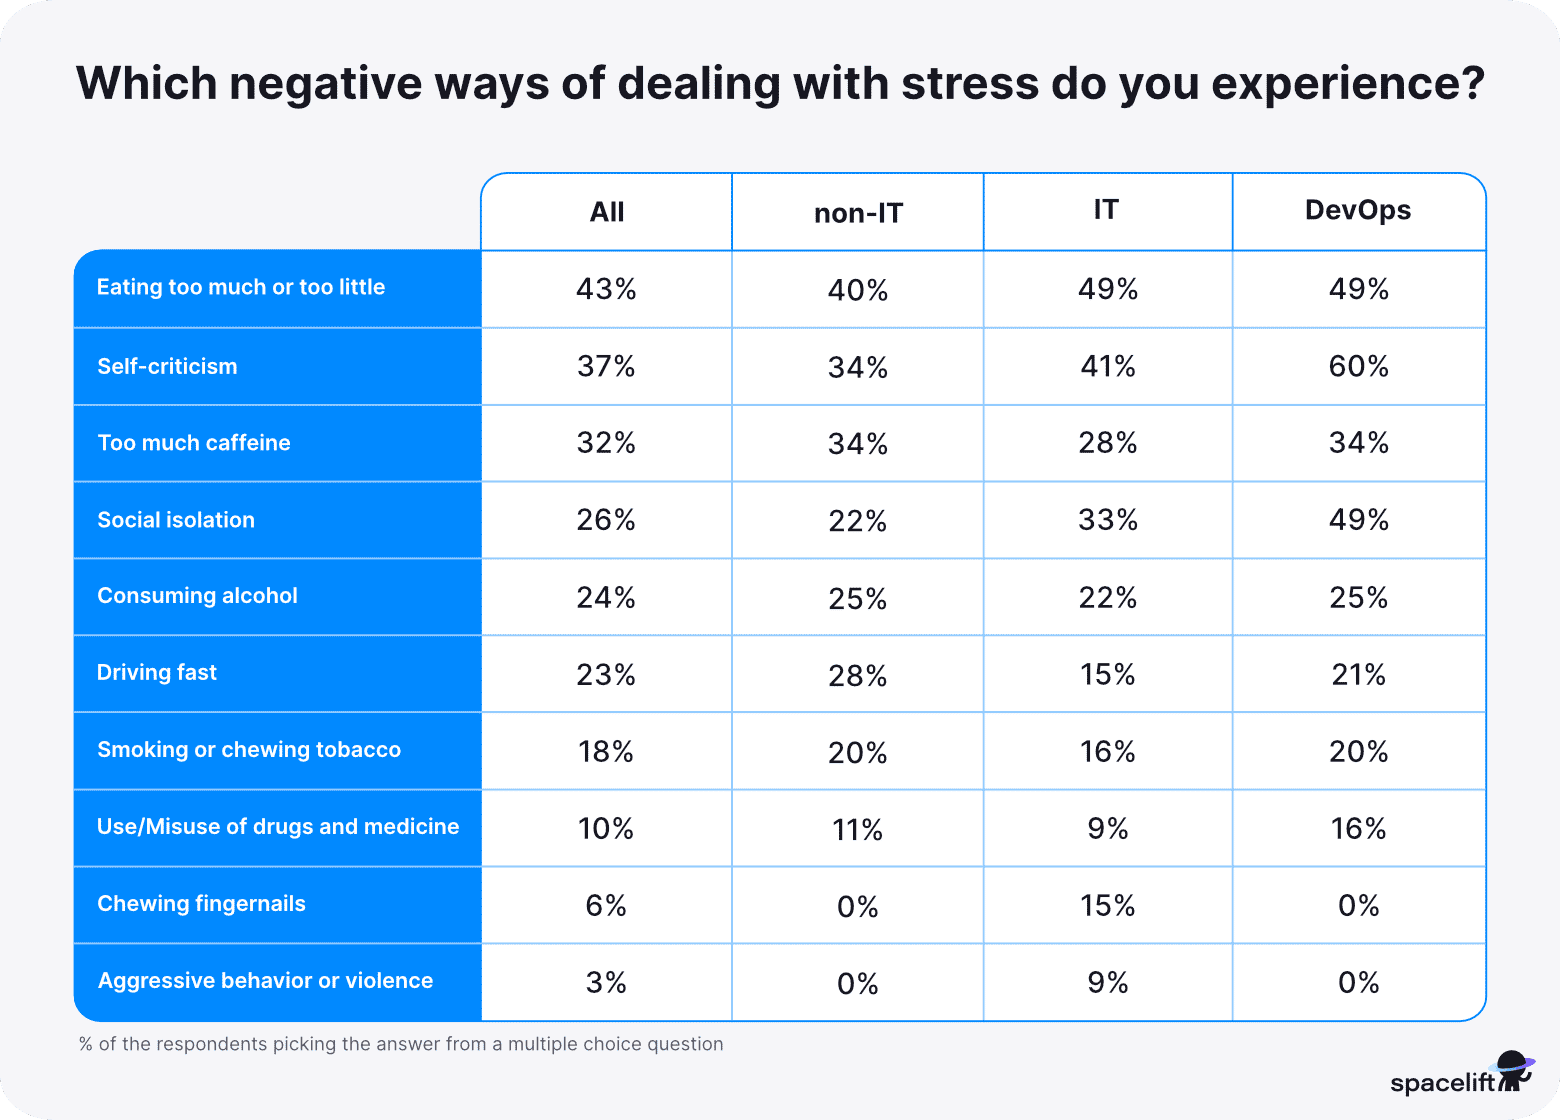 Negative ways of dealing with stress - stress in IT report